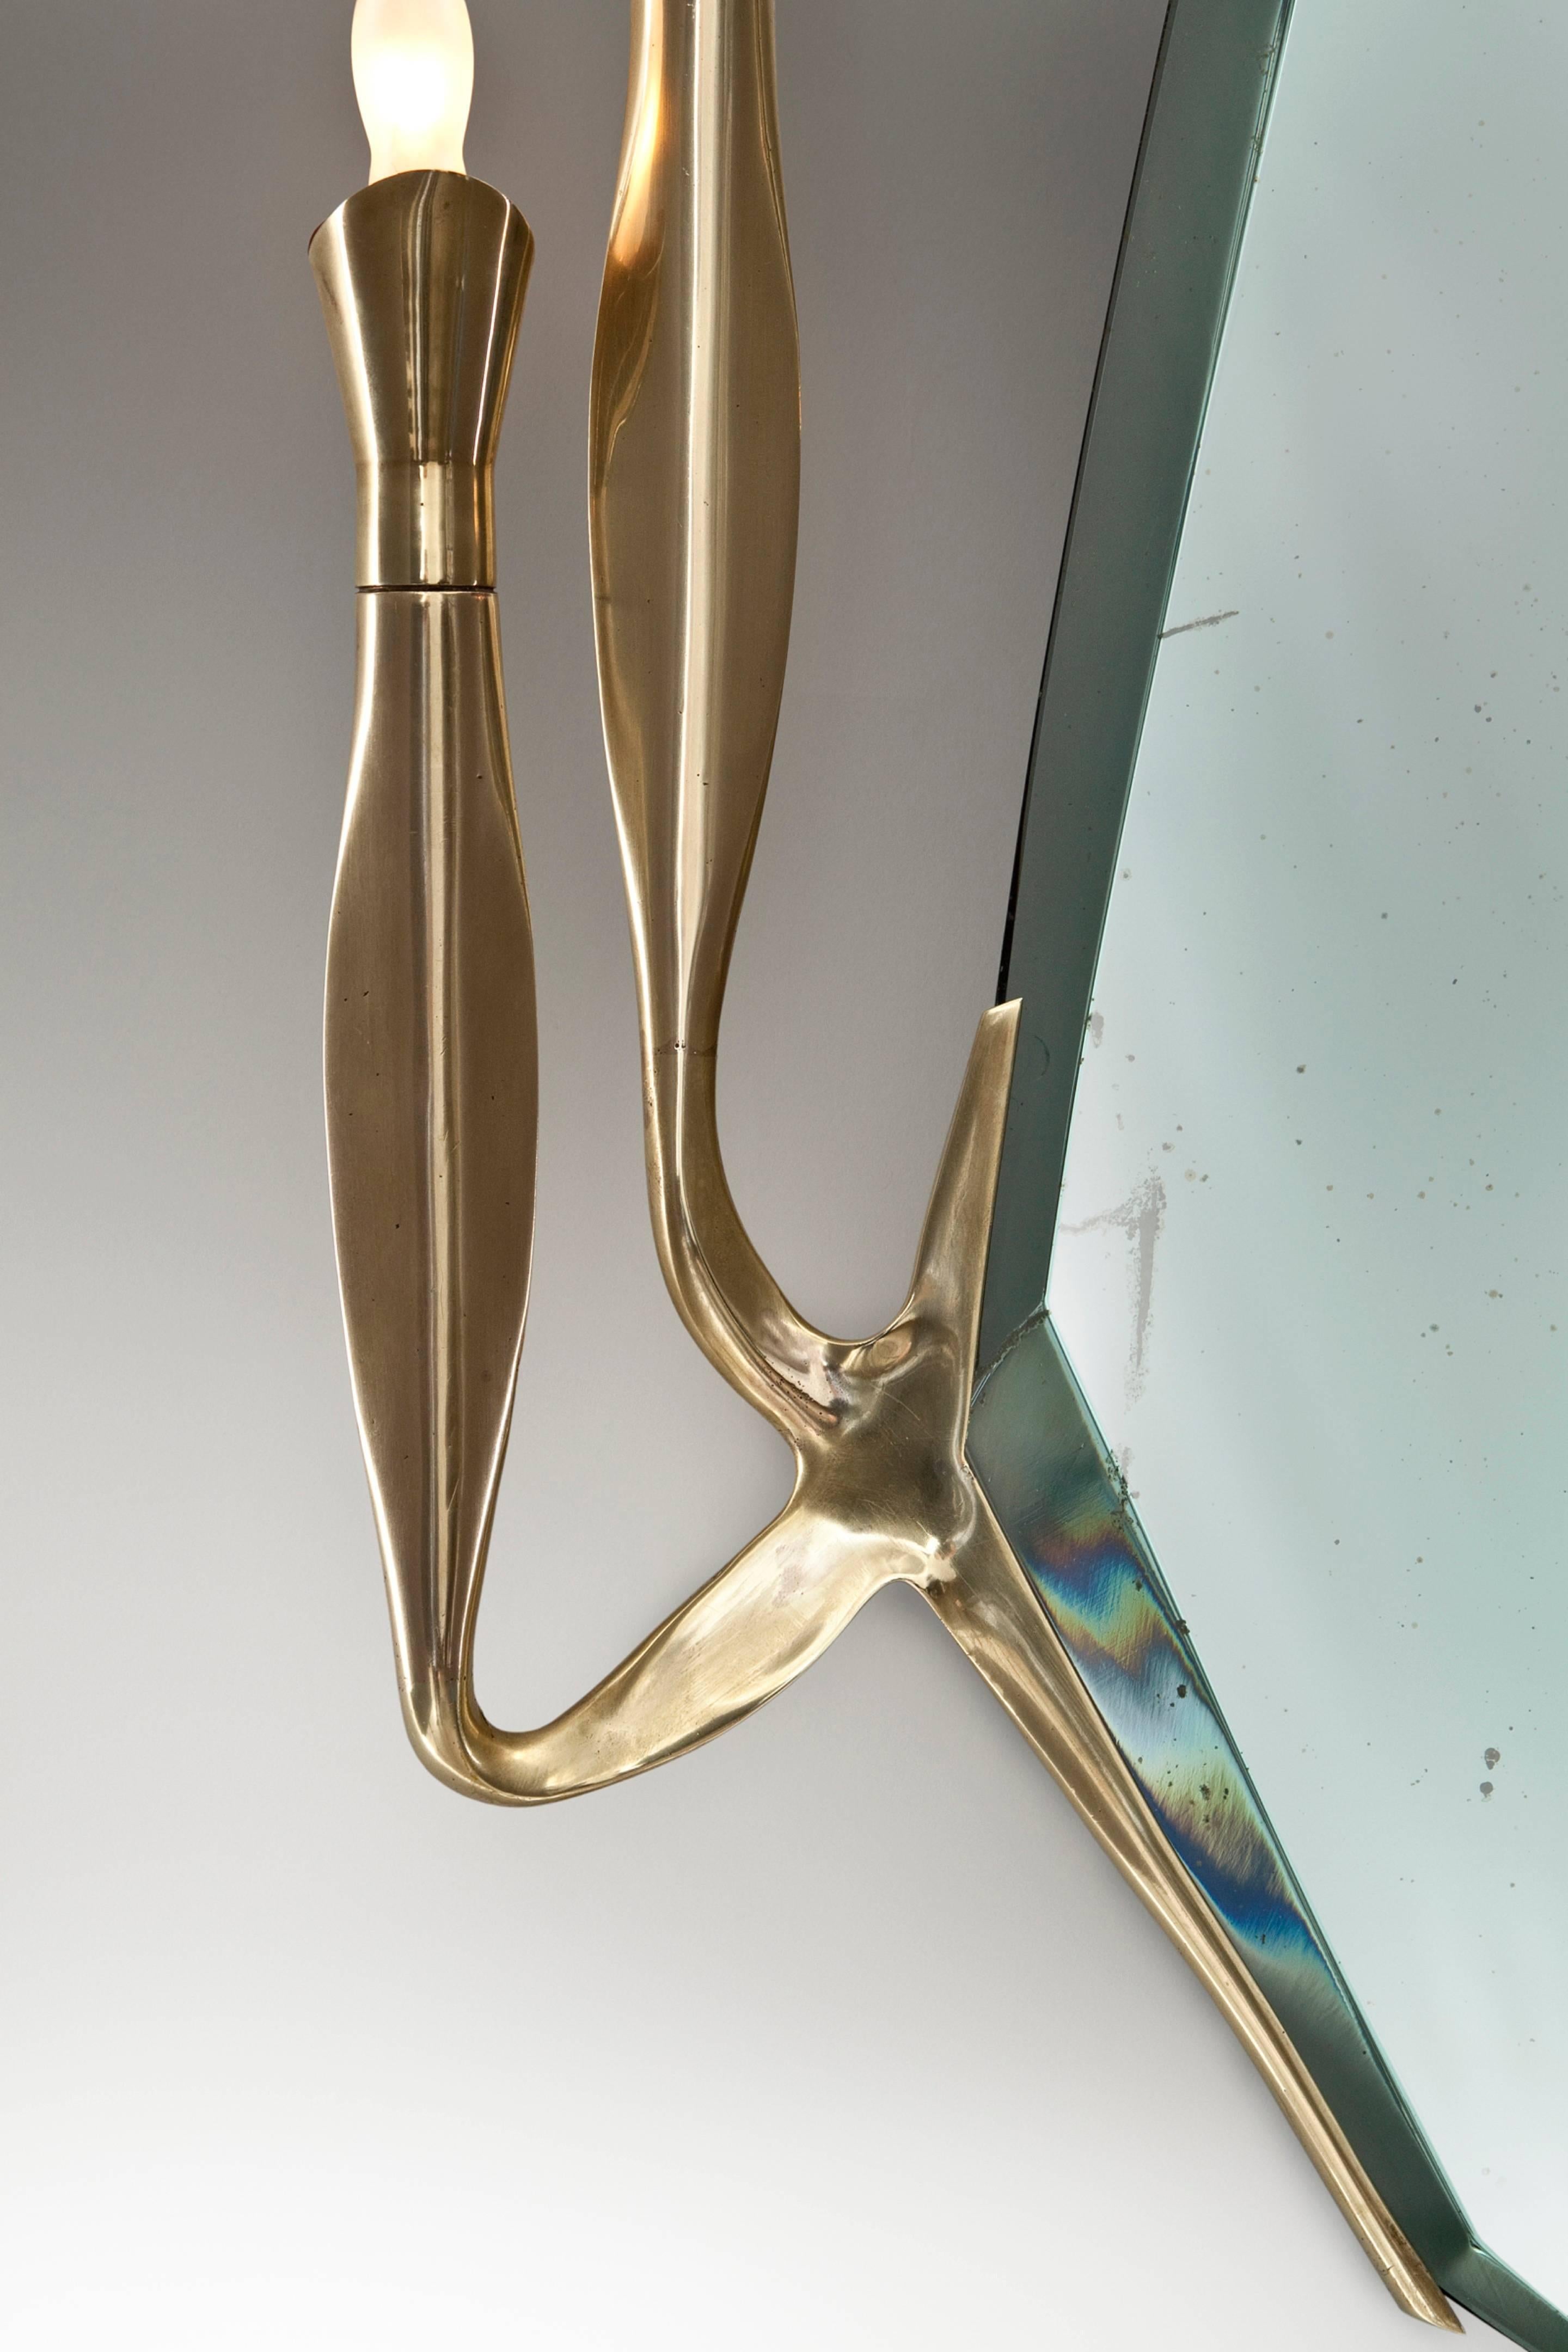 One of the sought after and hardest to find Fontana mirrors. The cartouch-shaped aquamarine-tinted mirror plate with an angular bevel, issuing four curvaceous upright brass arms, each arm with a single light holder.

For related examples, see